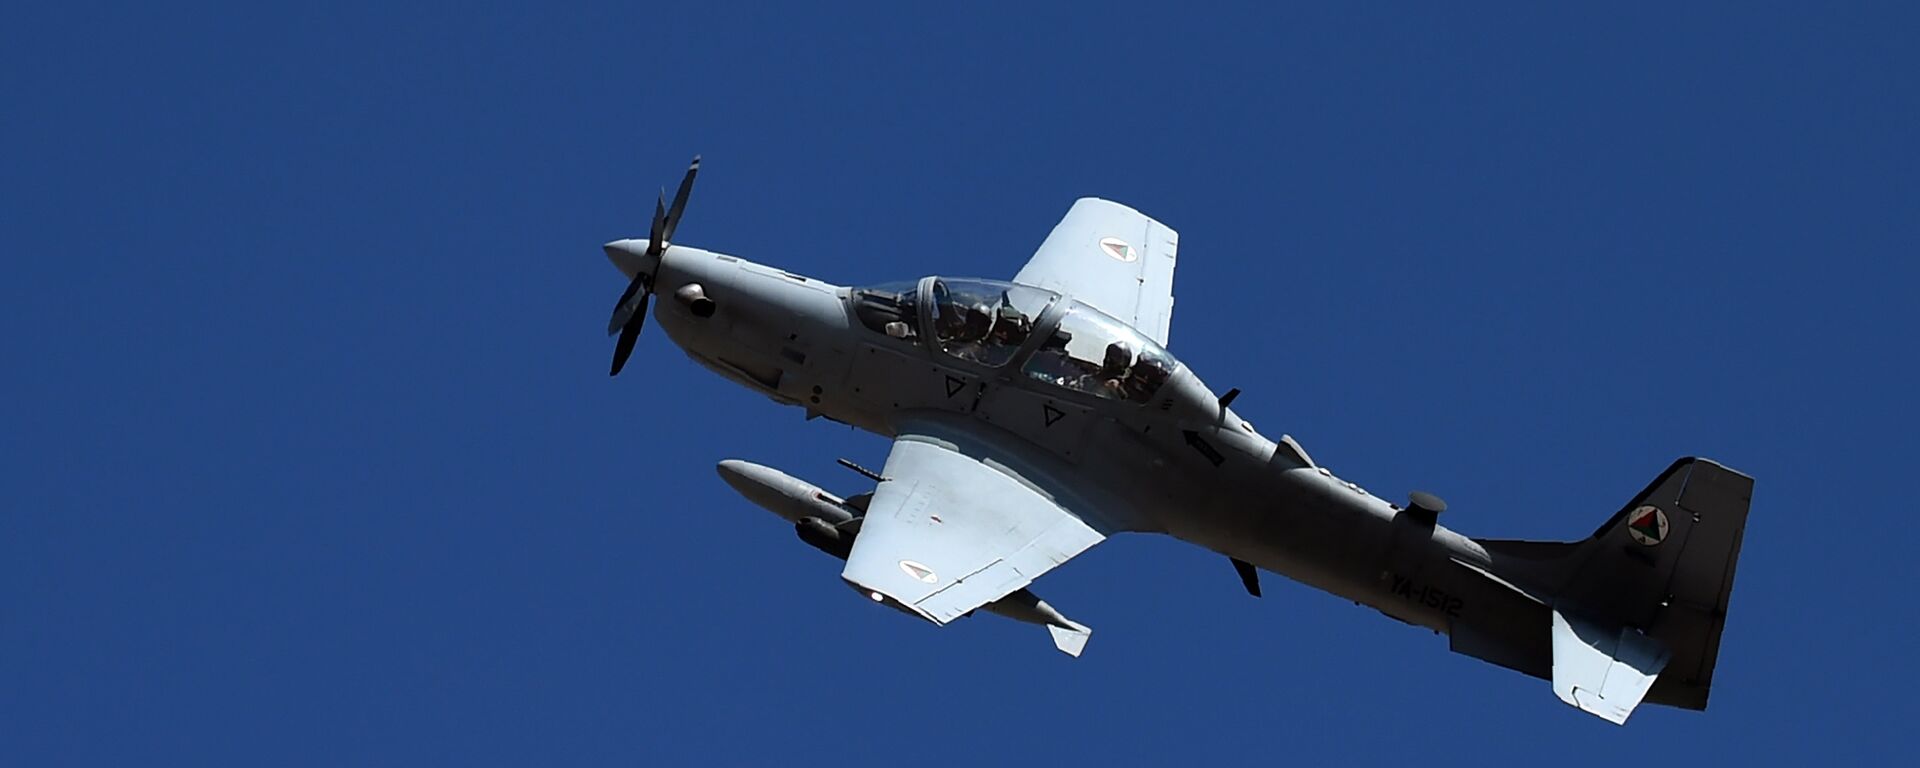 In this photograph taken on October 18, 2016, an Afghan Air Force Embraer A-29 Super Tucano aircraft flies during an airstrike training mission on the outskirts of Logar province - Sputnik International, 1920